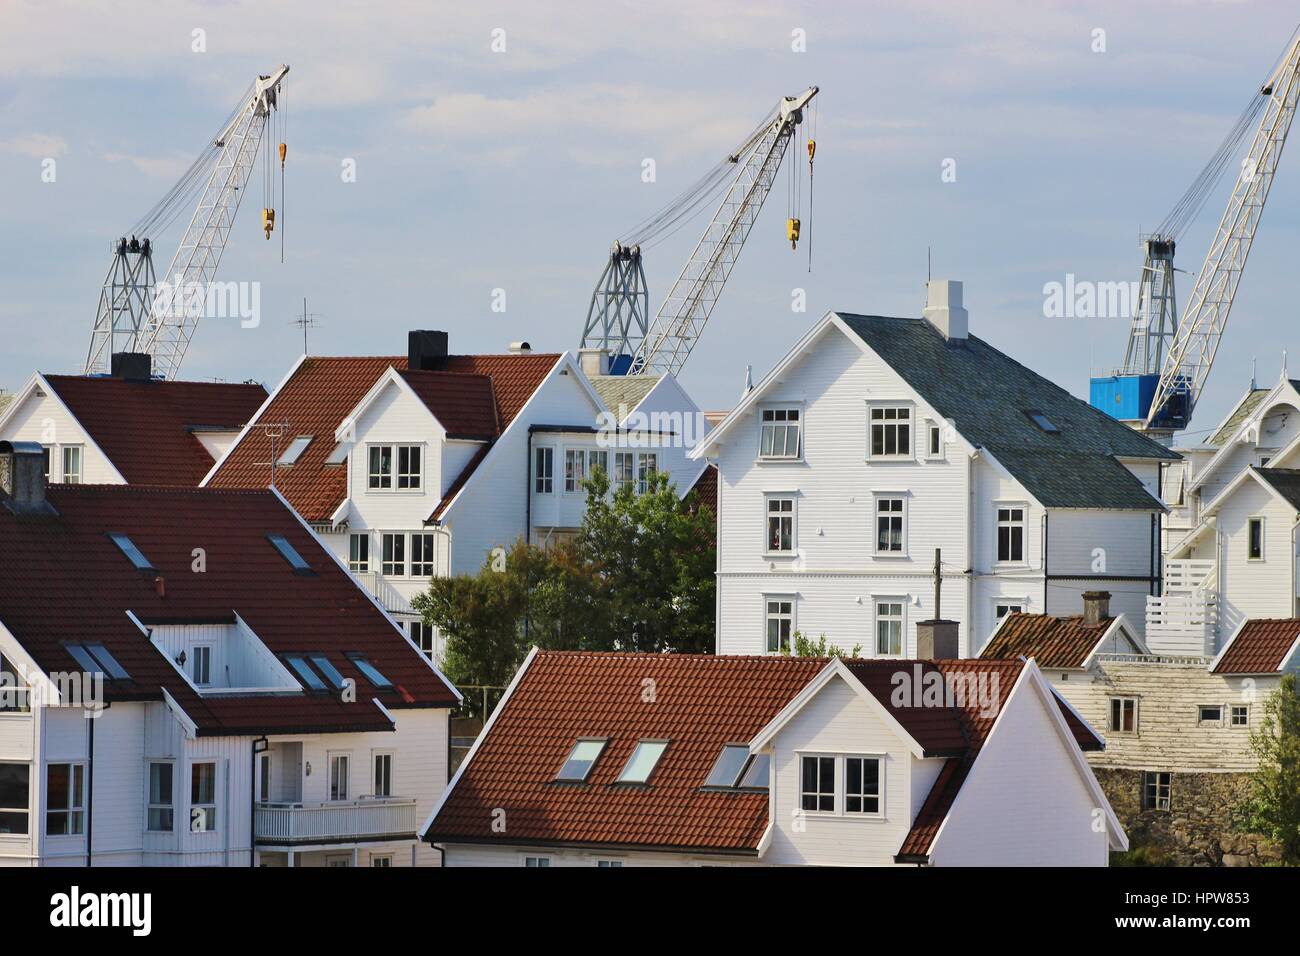 Houses on the Island Risoy, part of the town Haugesund, with cranes of a shipyard in the background. West coast of Norway, Scandinavia, Europe. Stock Photo